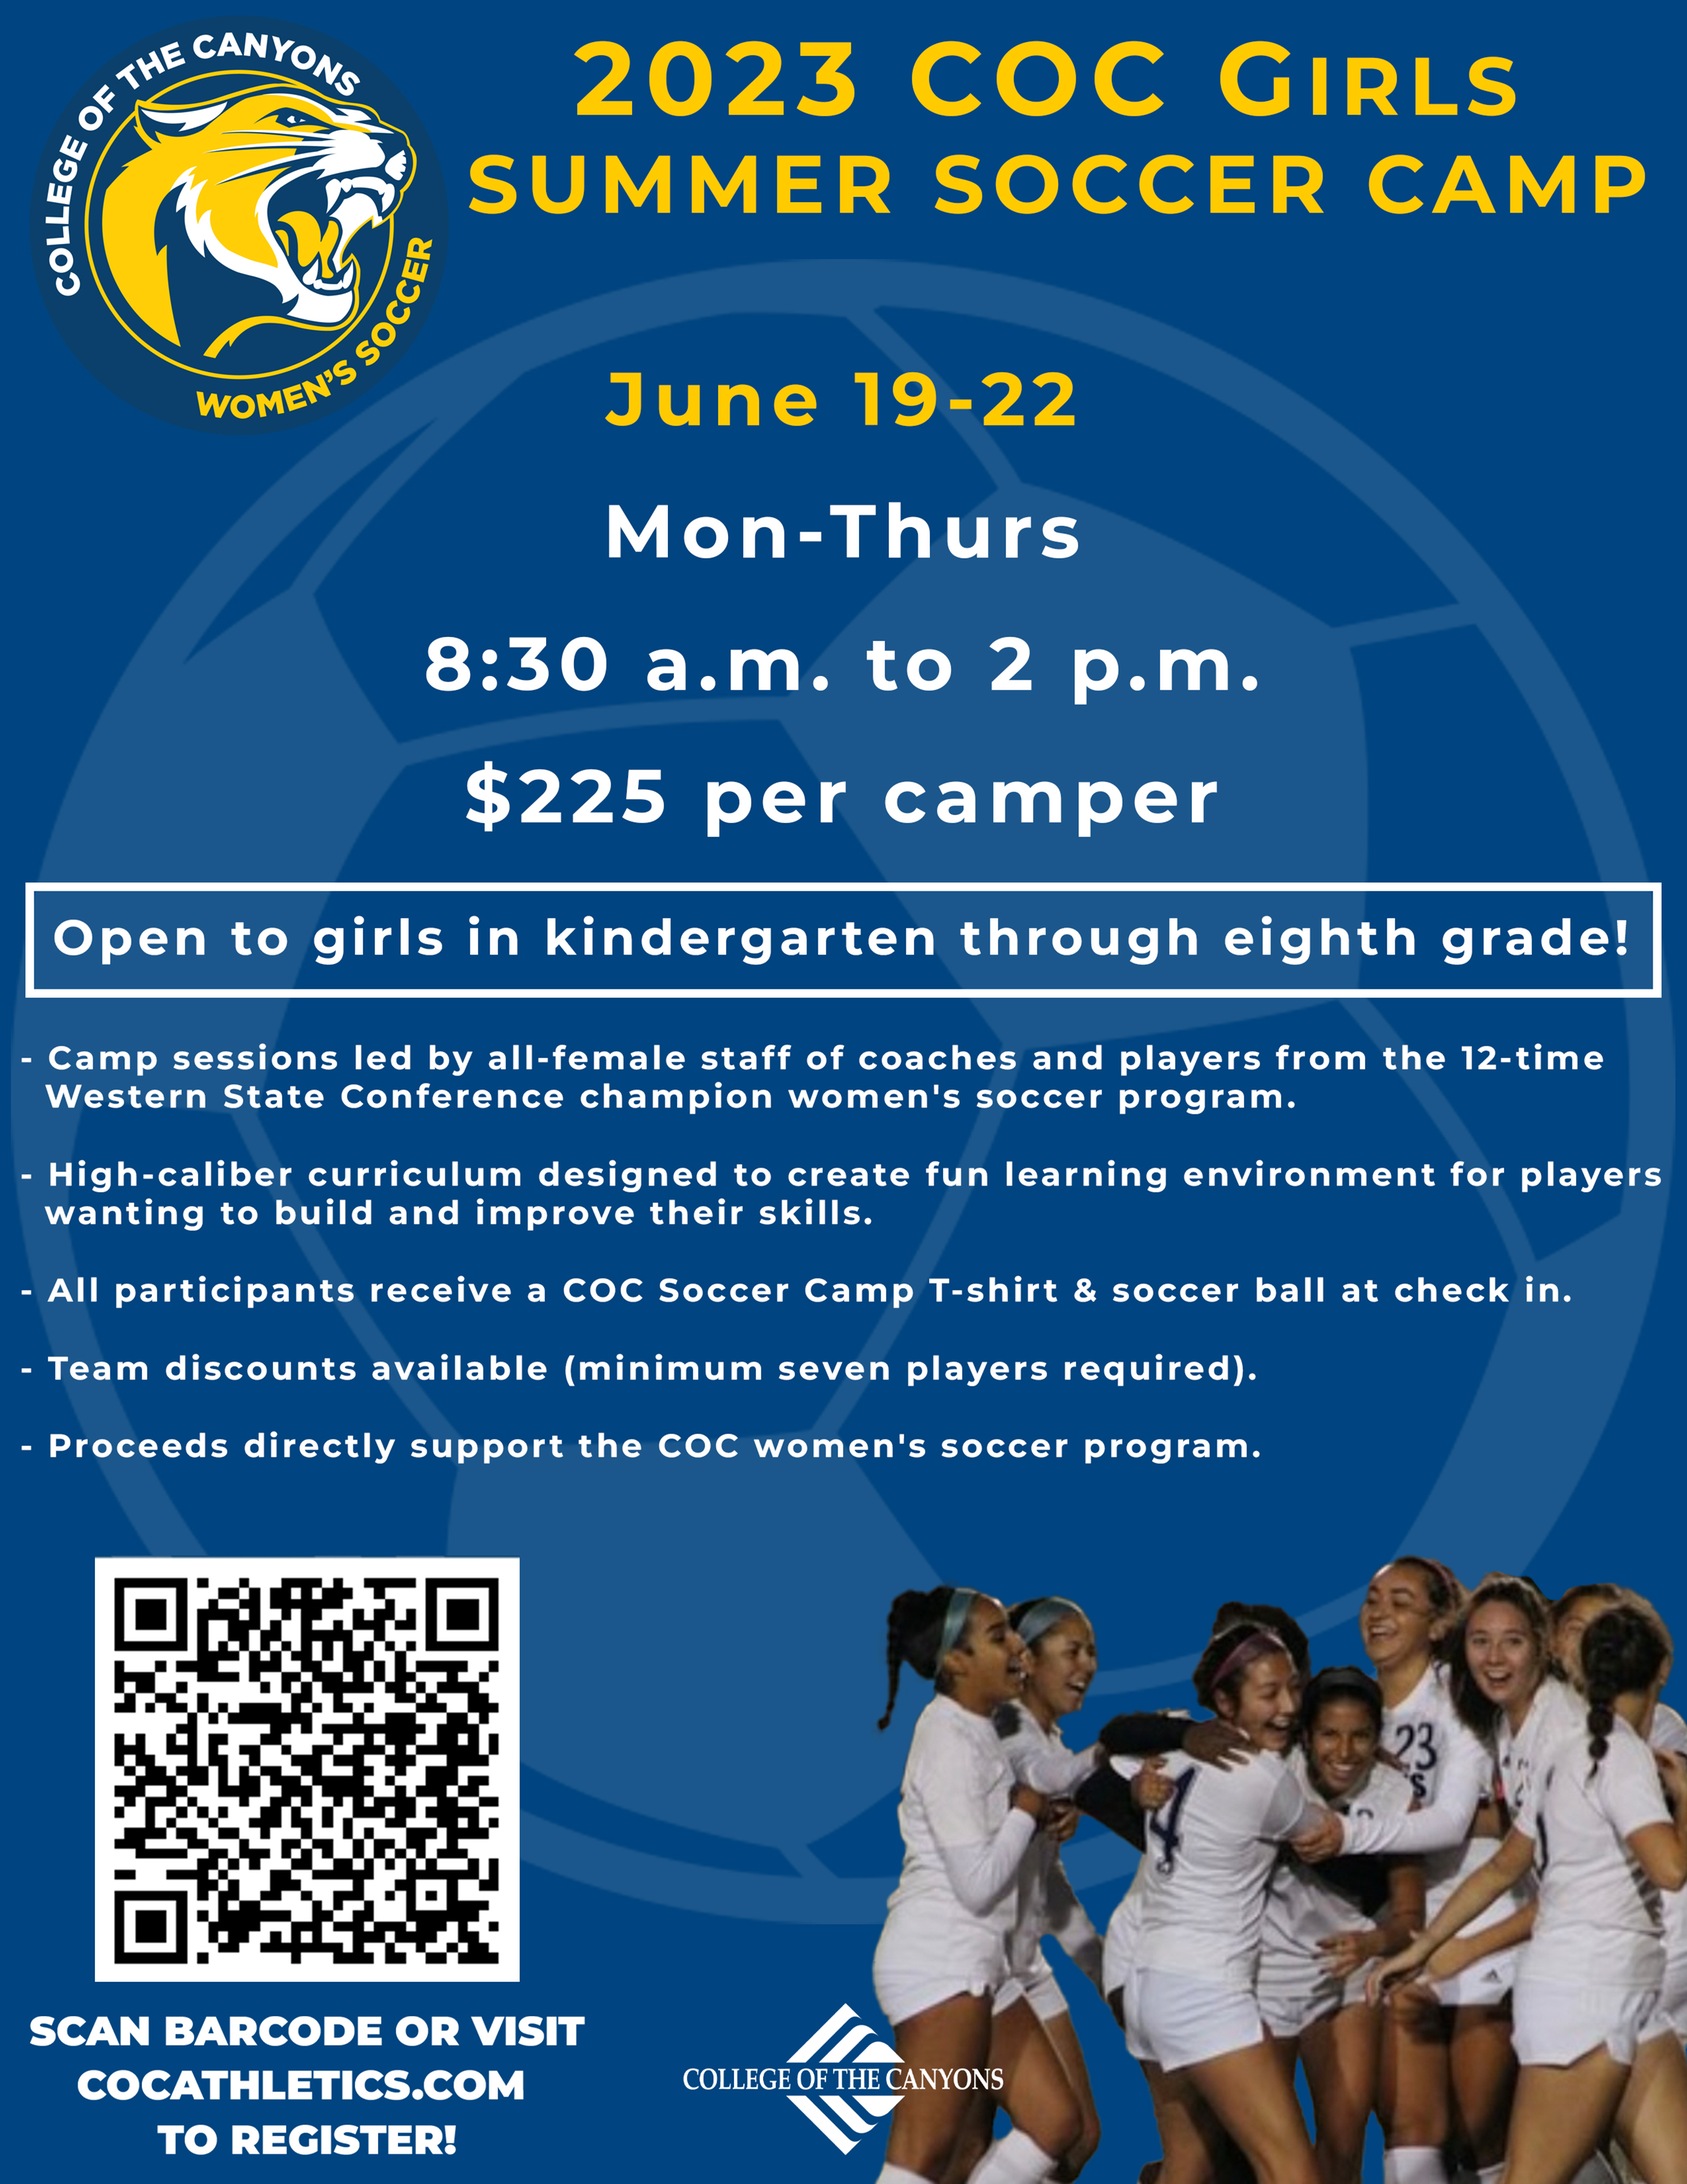 College of the Canyons 2023 summer soccer camp promotional flier.